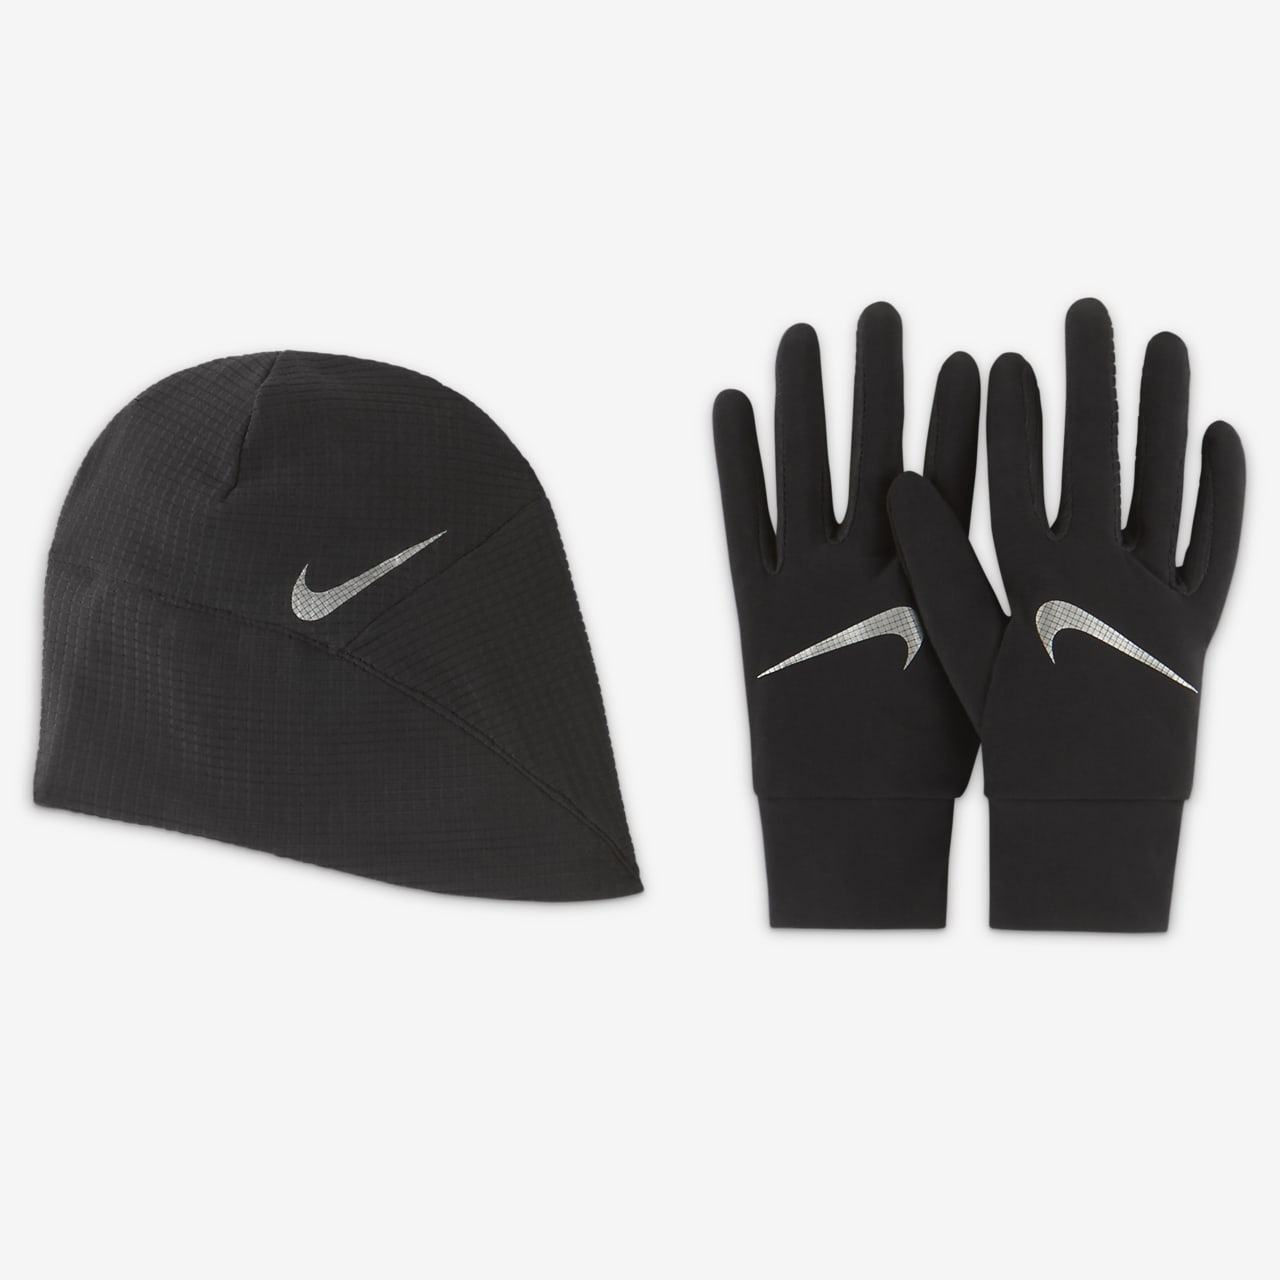 Nike Mens Essential Running Hat and Glove Set Black/Silver L/XL